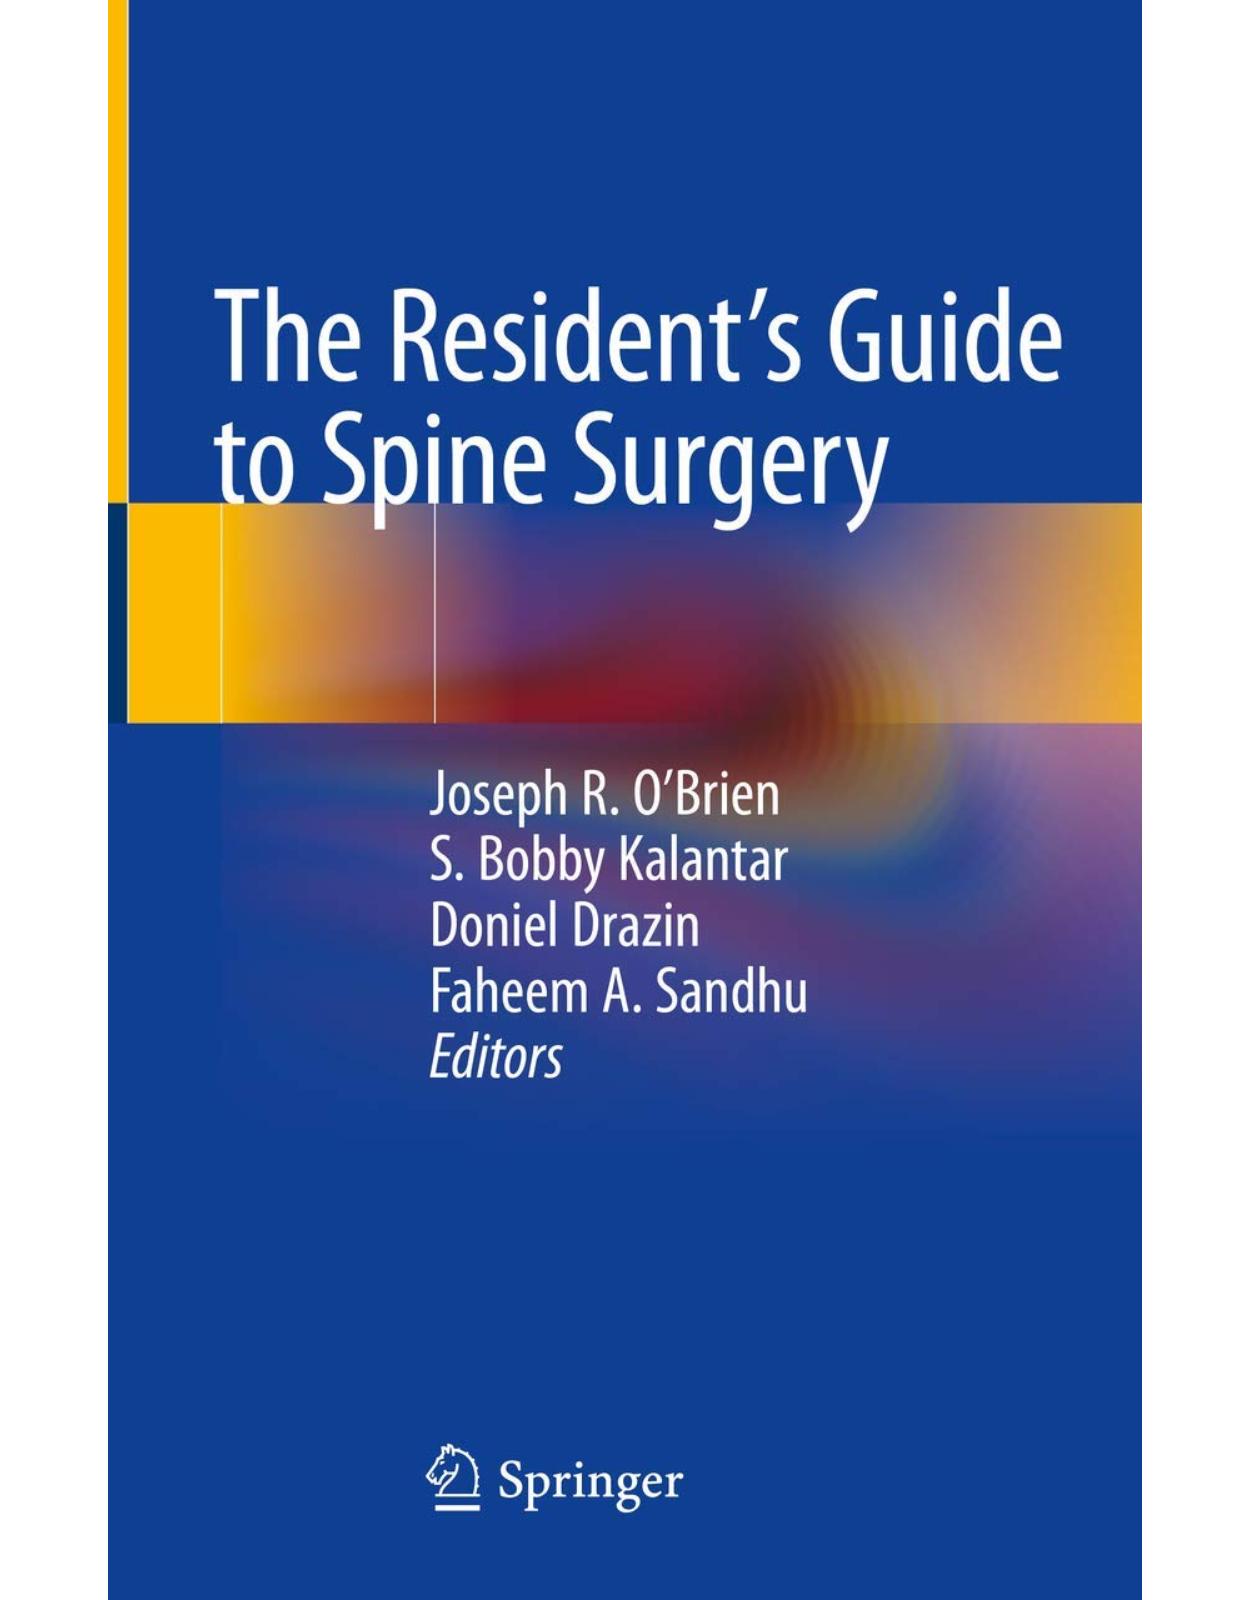 The Resident's Guide to Spine Surgery